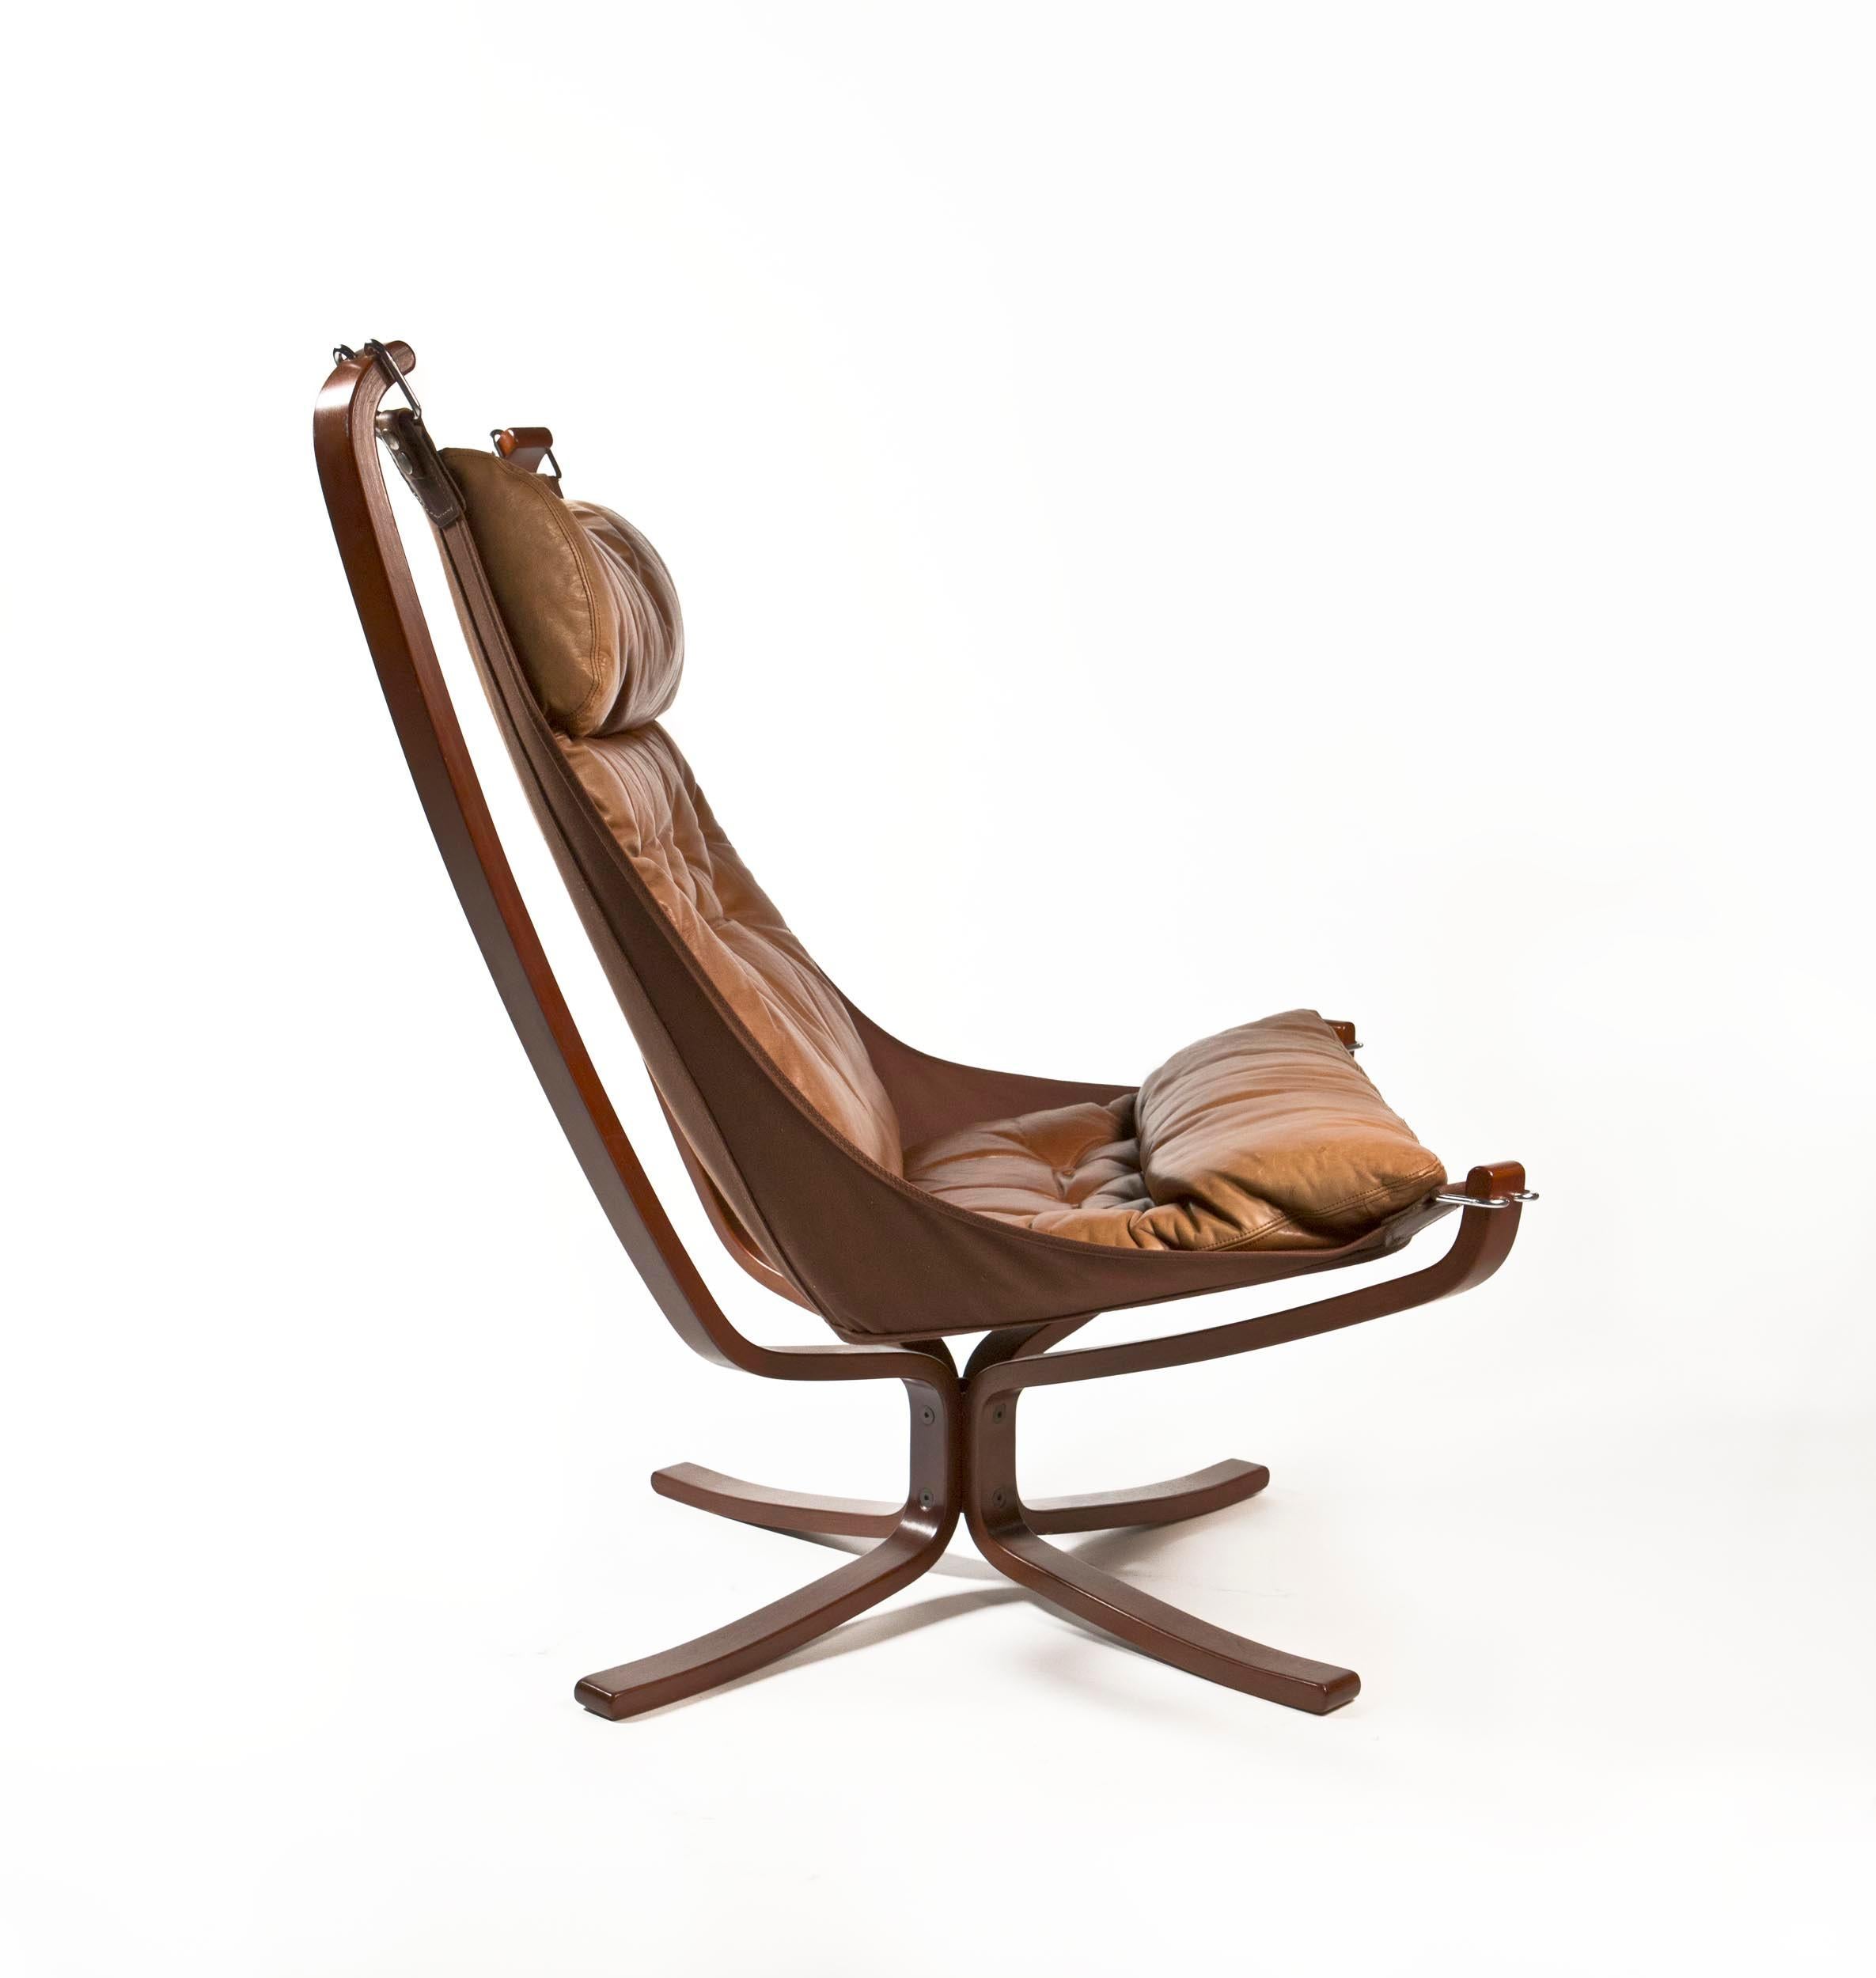 Norwegian Falcon Chair by Sigurd Ressell for Vatne Møbler in Brown Leather, Norway, 1970s